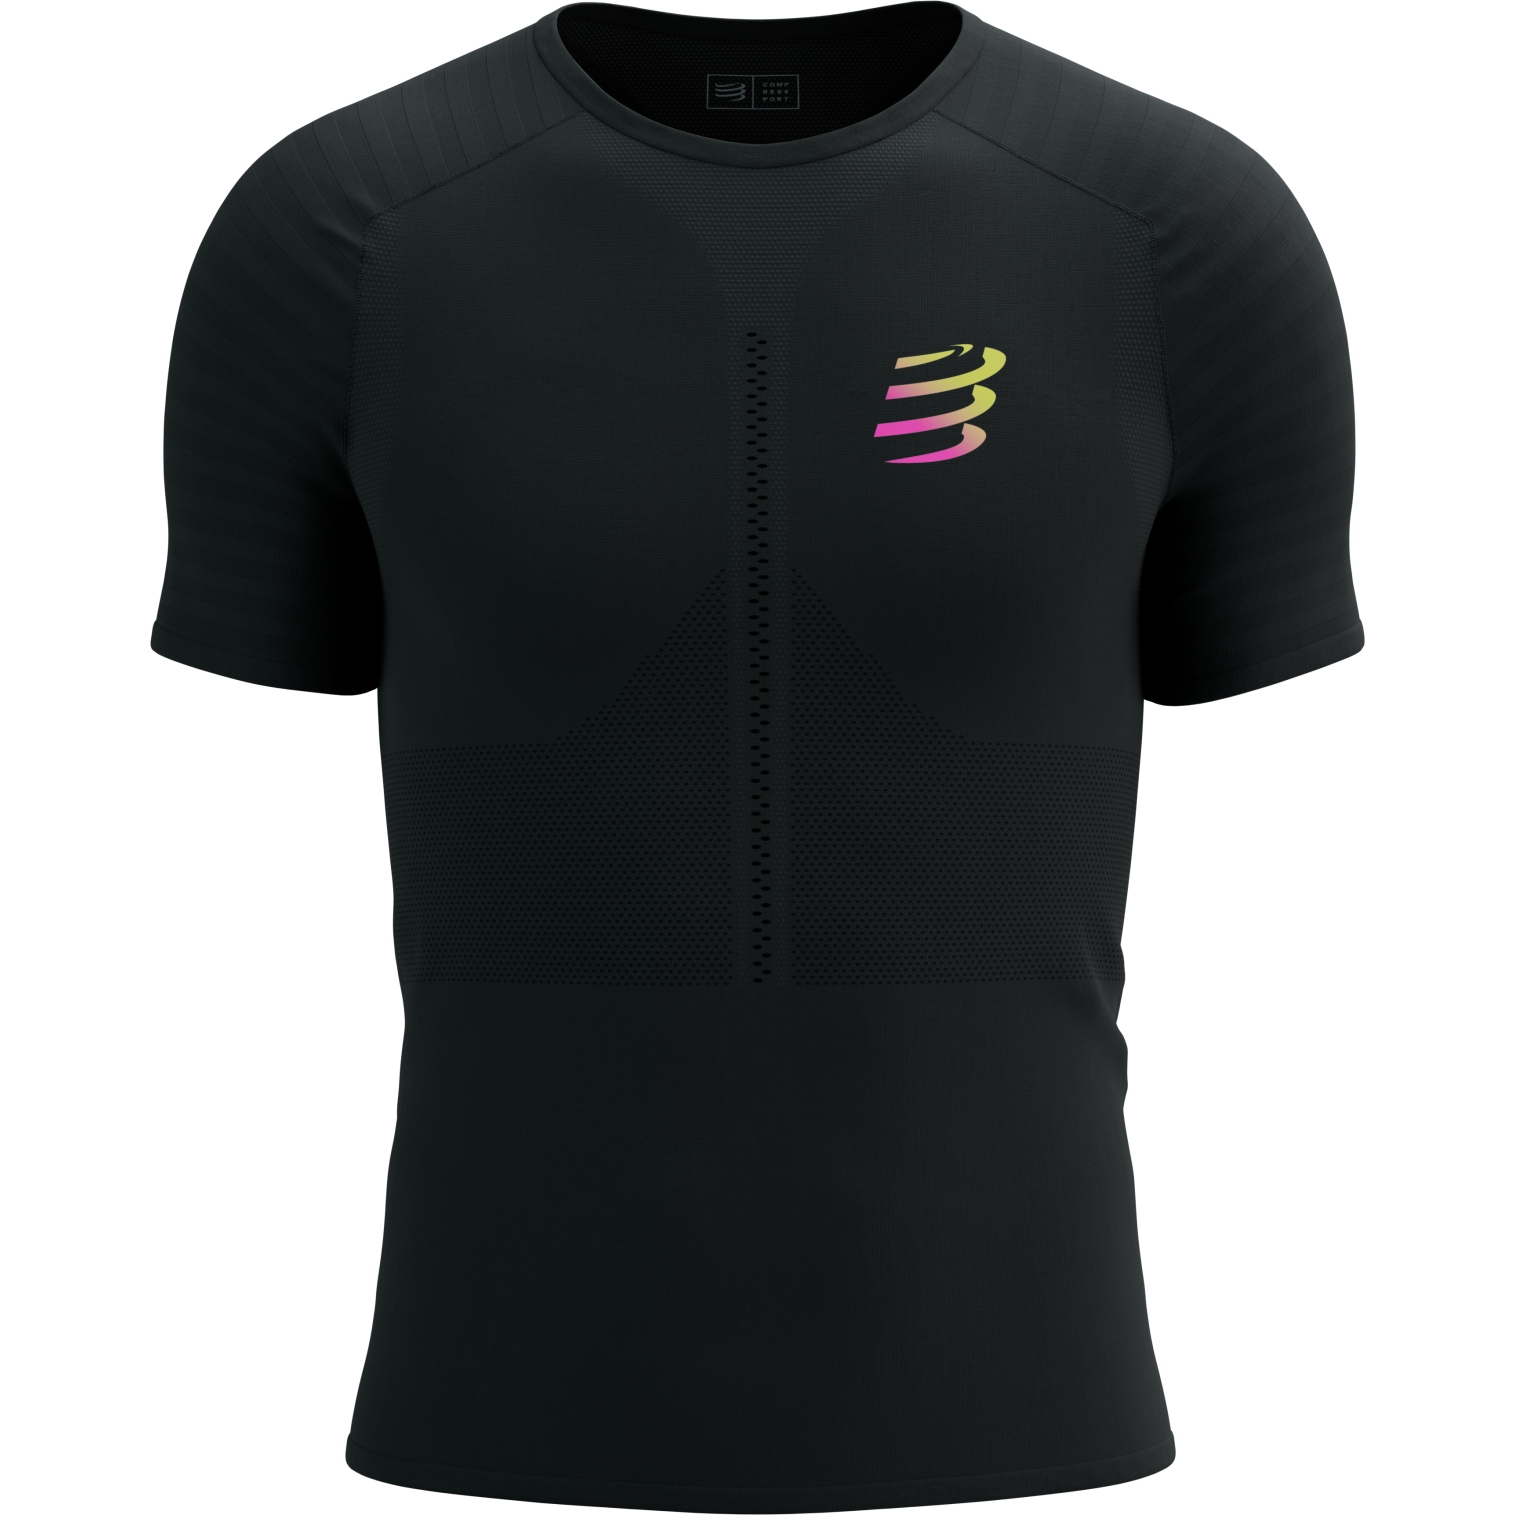 Picture of Compressport Racing T-Shirt Men - black/safety yellow